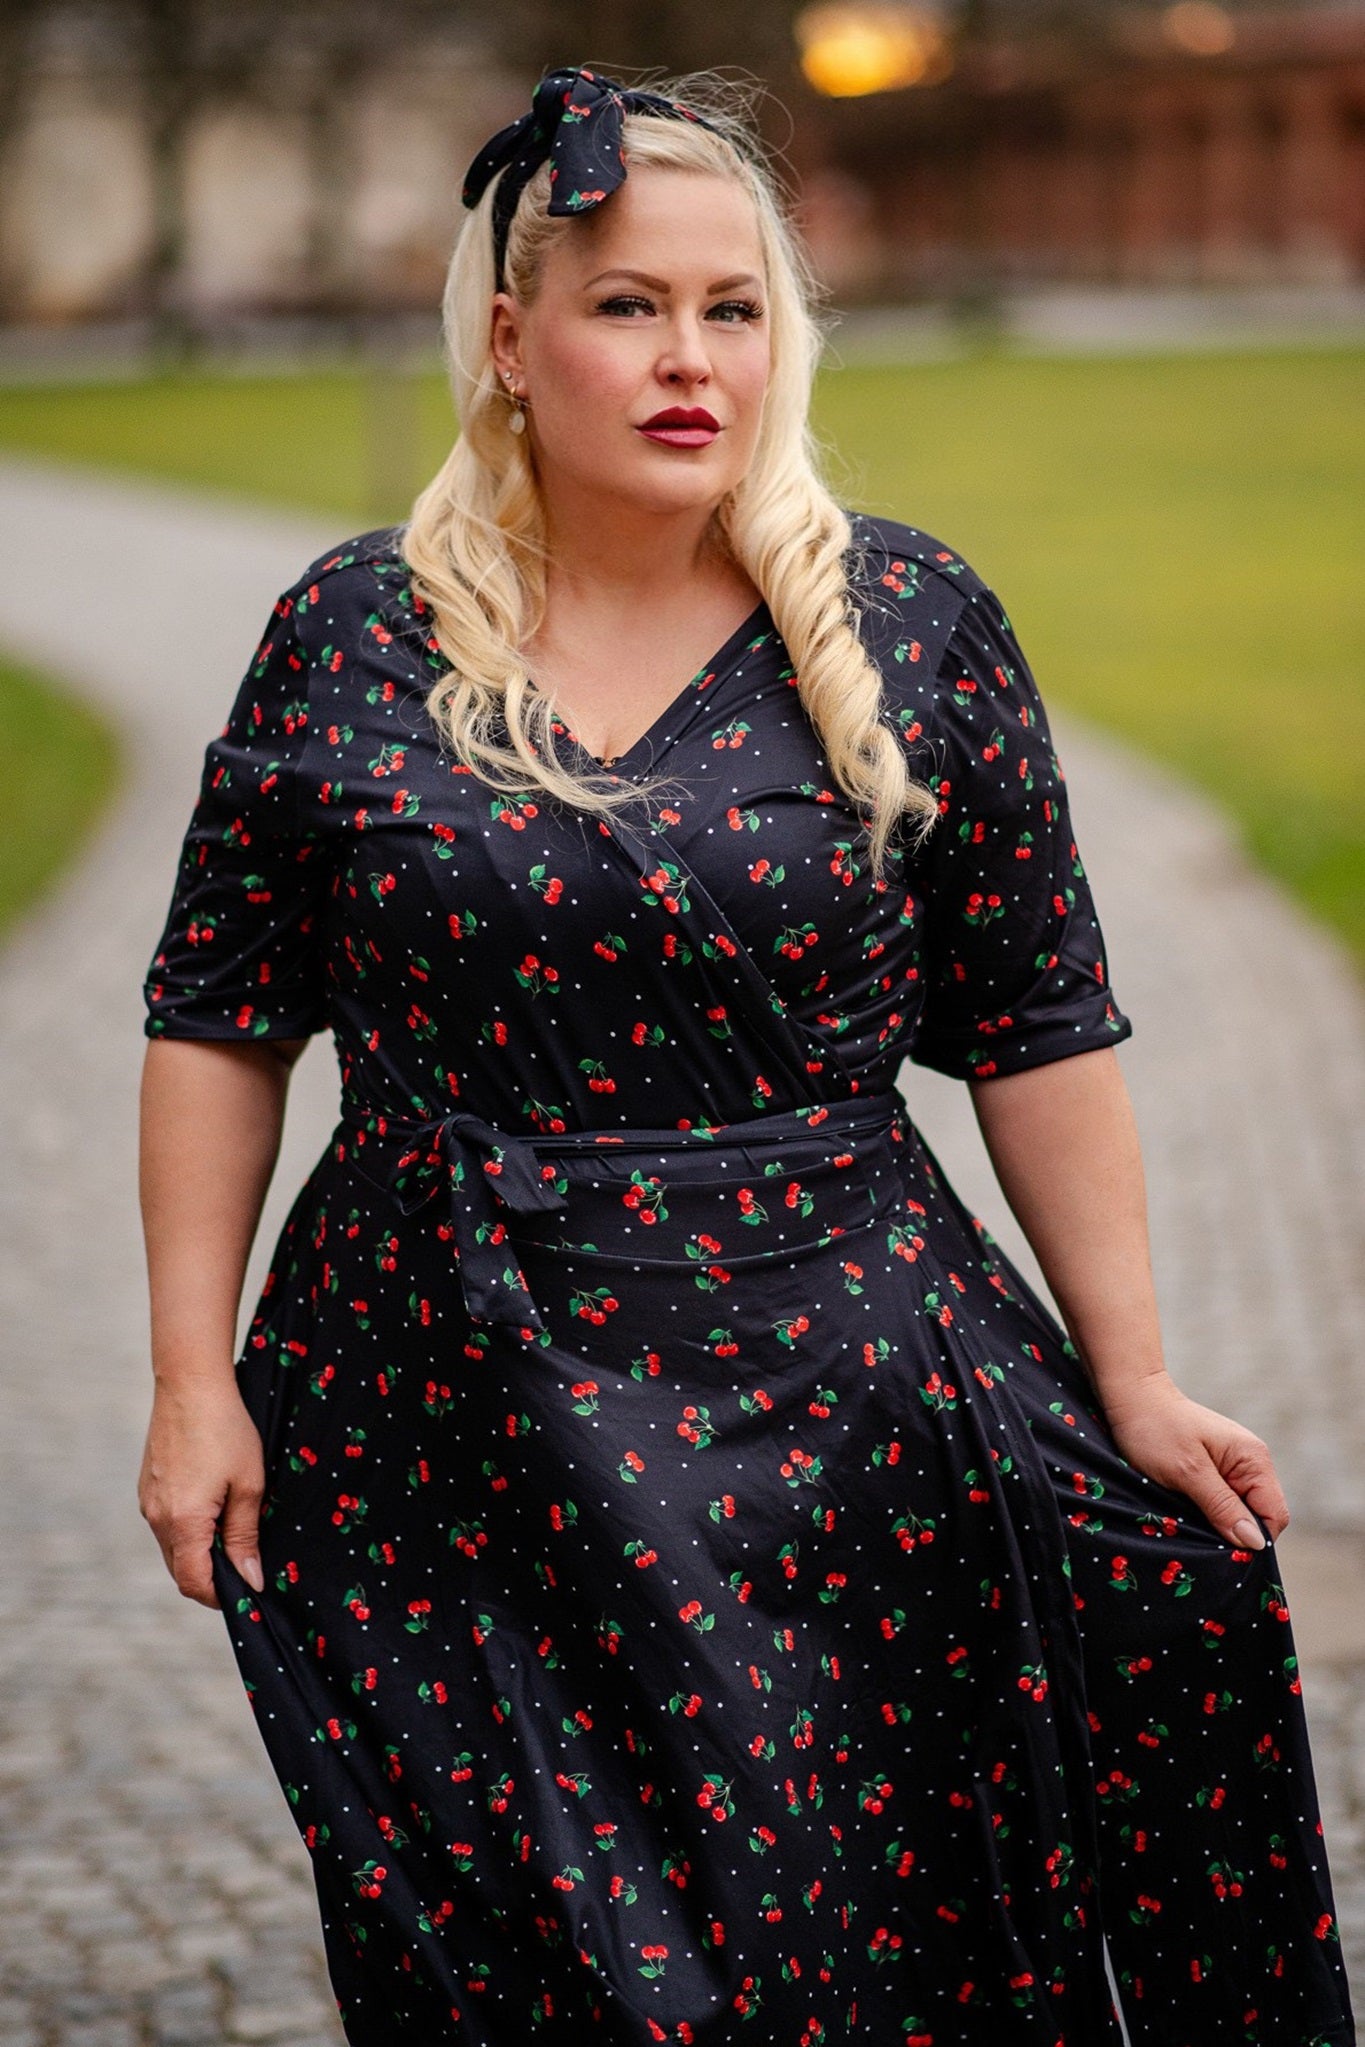 Customer wears our Matilda short sleeved wrap dress in black, with red cherries print